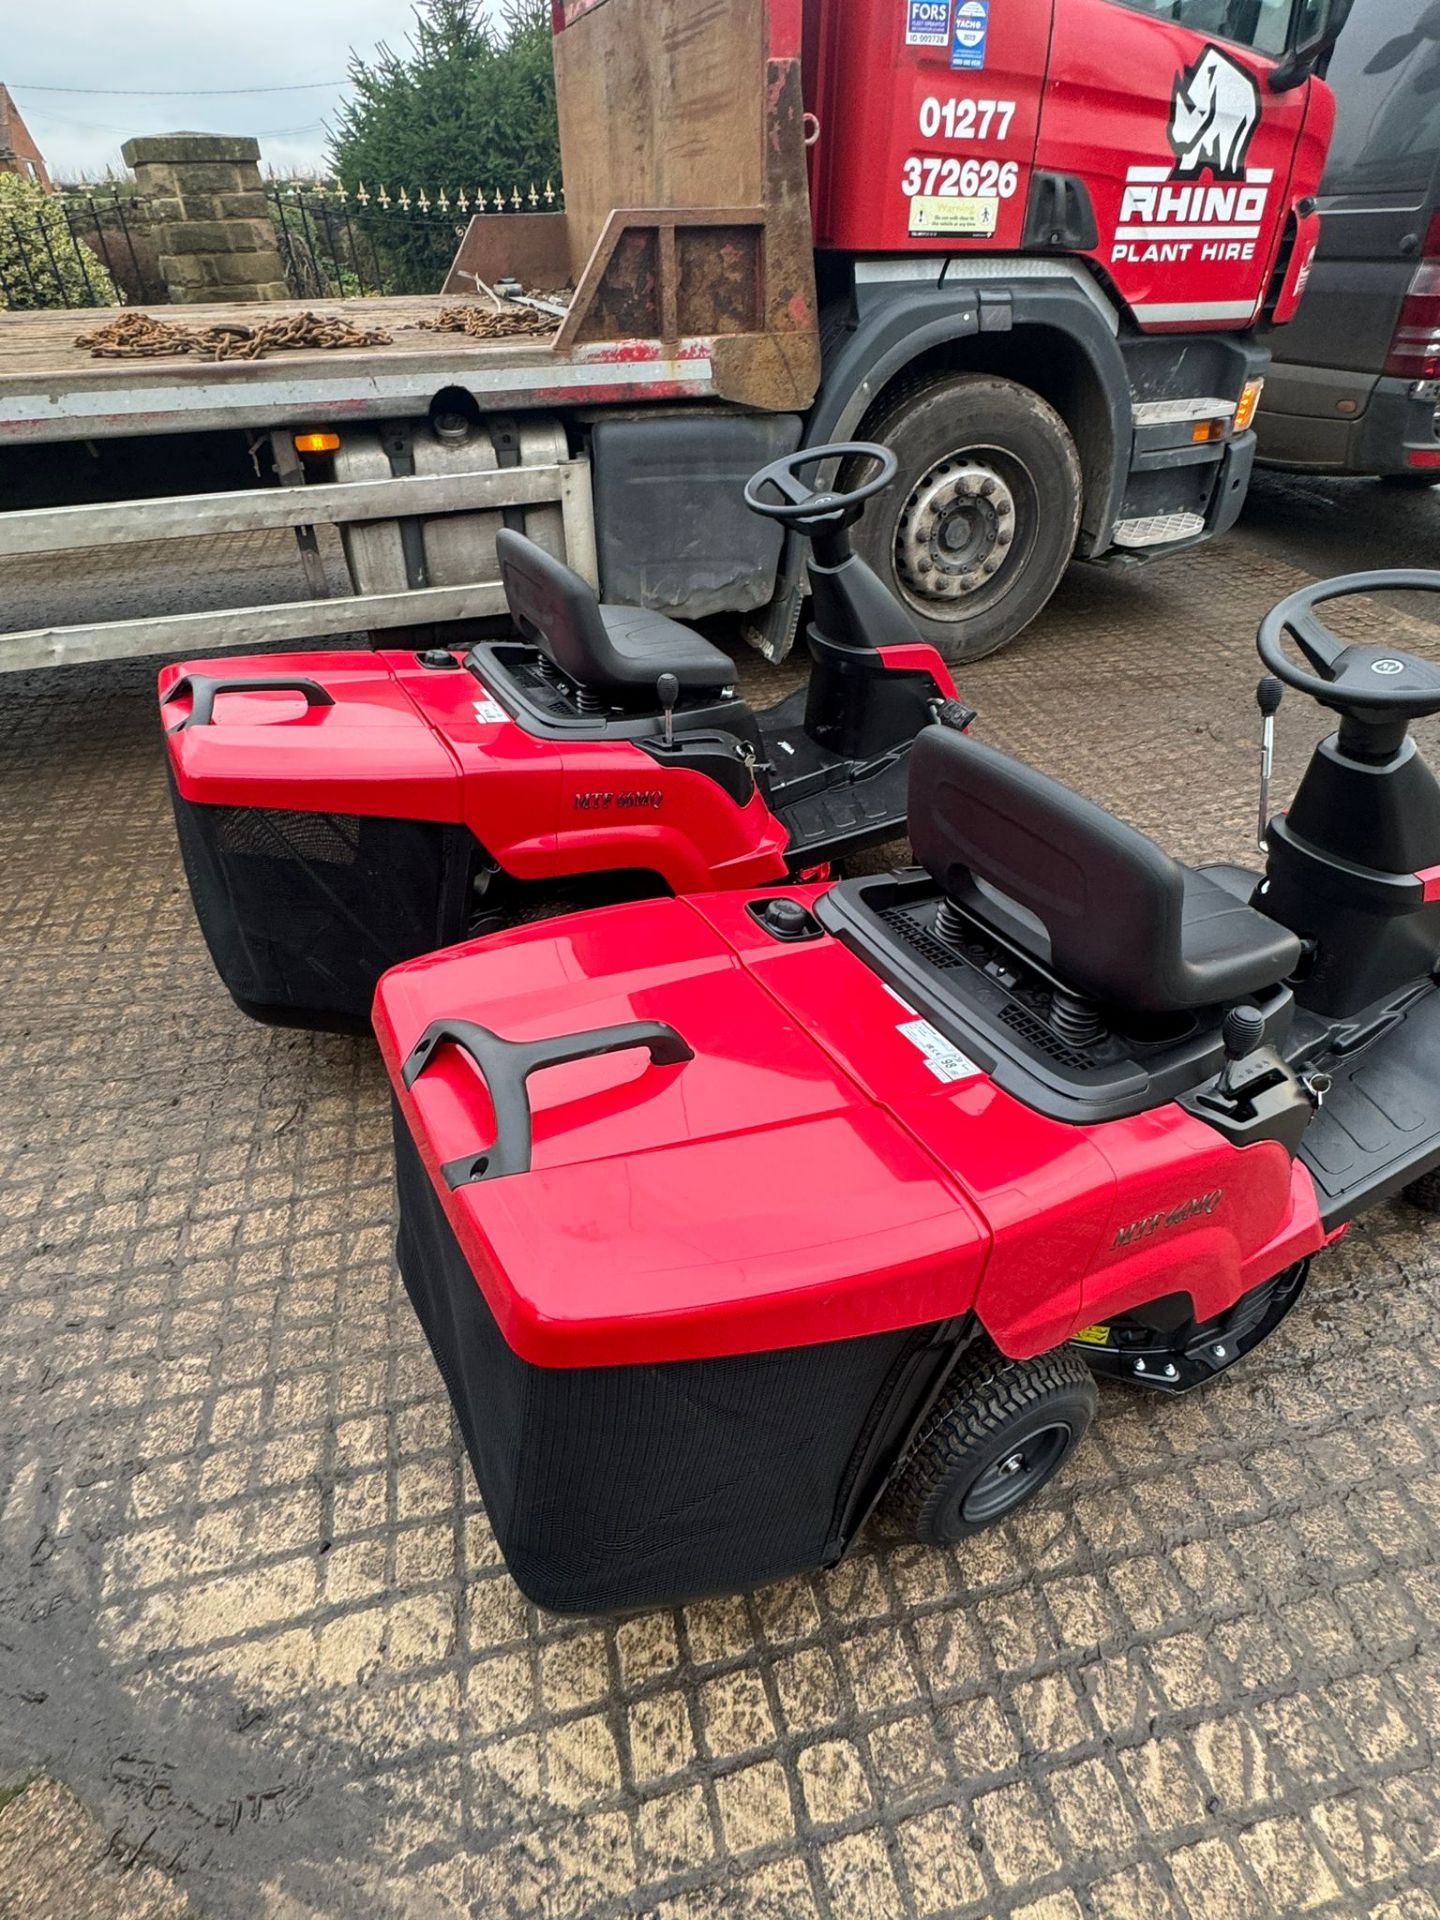 NEW/UNUSED MOUNTFIELD MTF 66 MQ RIDE ON MOWER WITH REAR COLLECTOR *PLUS VAT* - Image 10 of 11